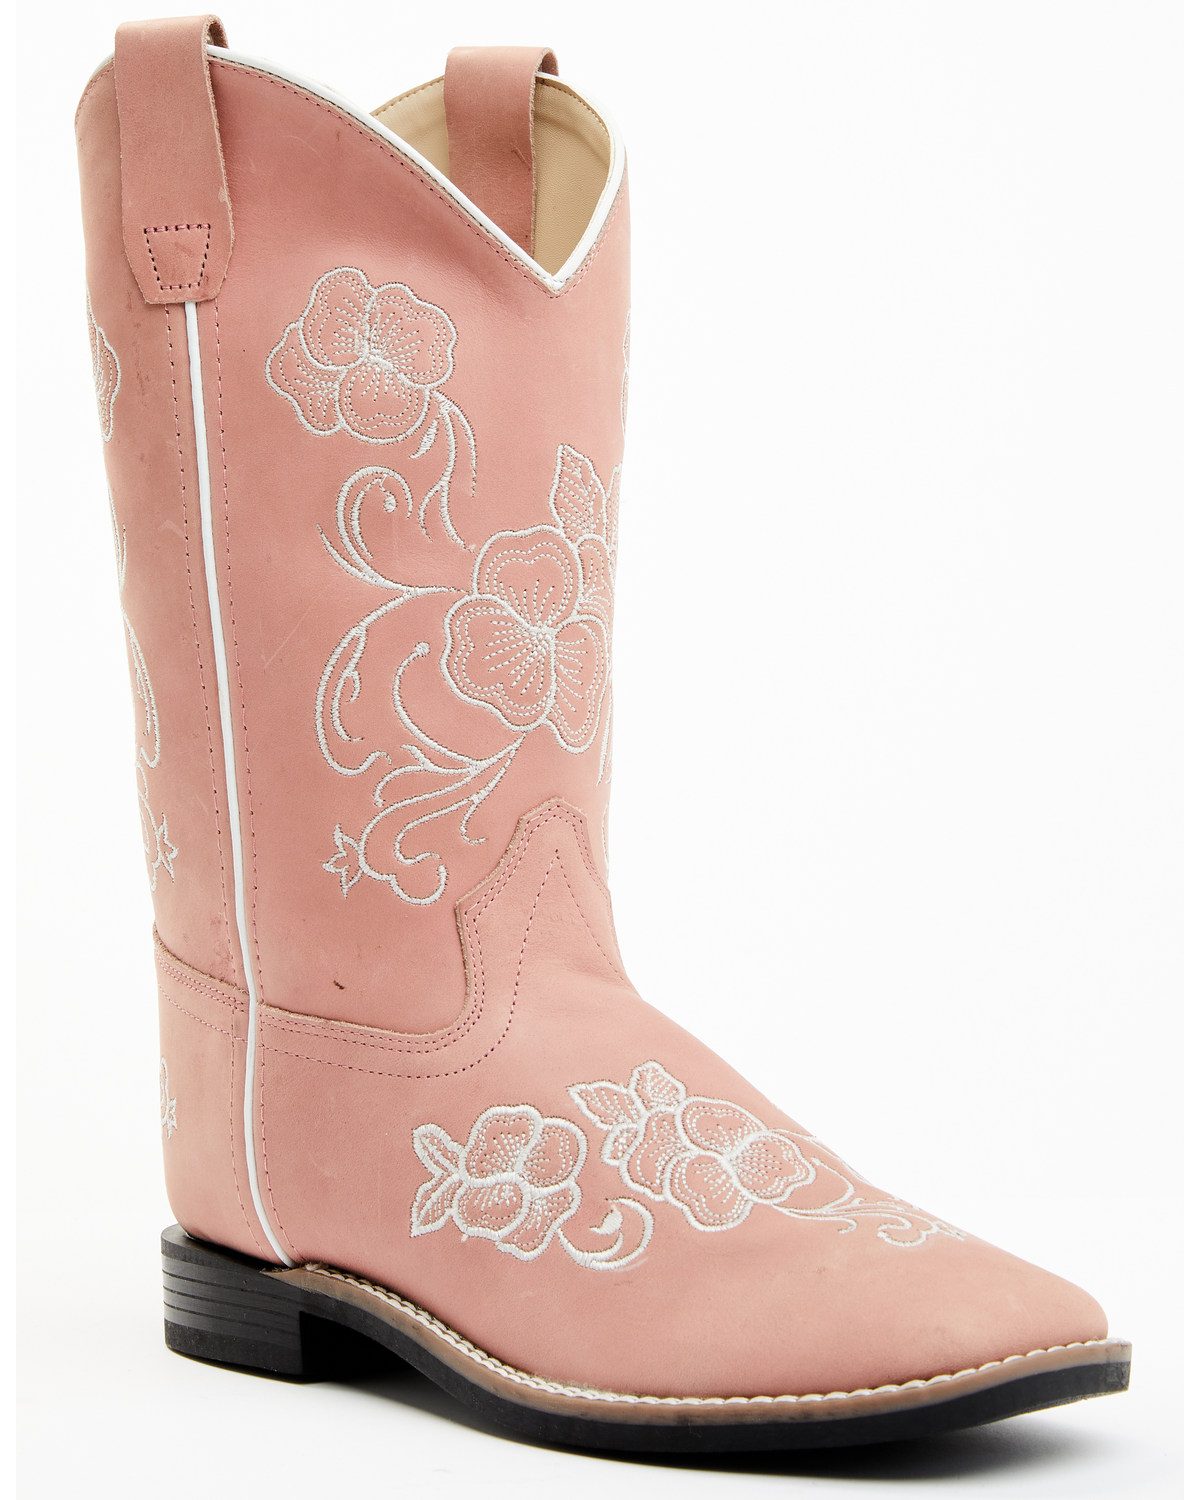 Shyanne Girls' Little Lasy Floral Embroidered Leather Western Boots - Broad Square Toe